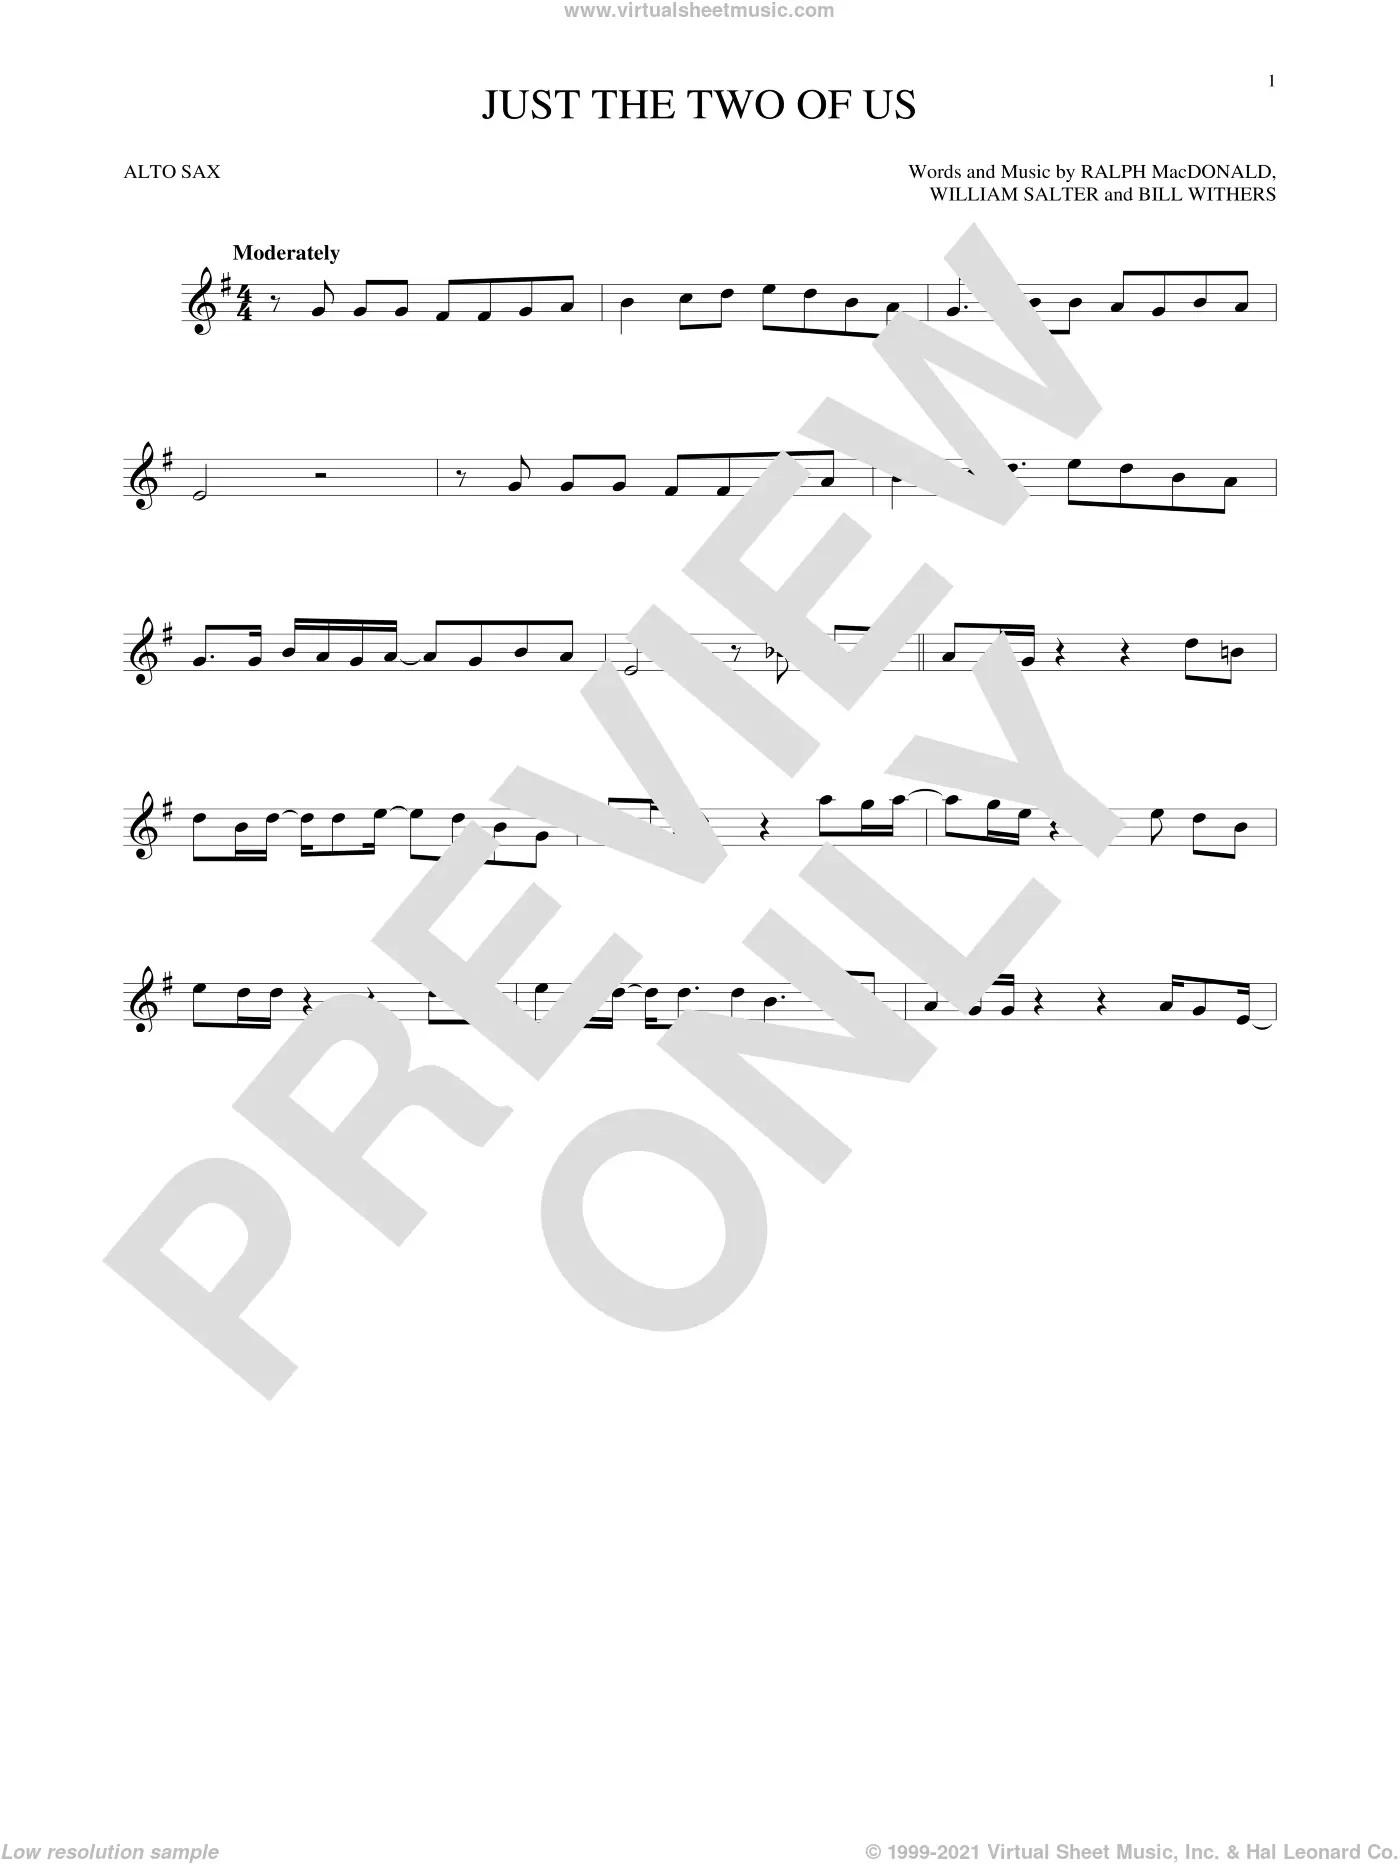 Just the Two of Us Lead Sheet - Bill WIthers Sheet music for Piano (Solo)